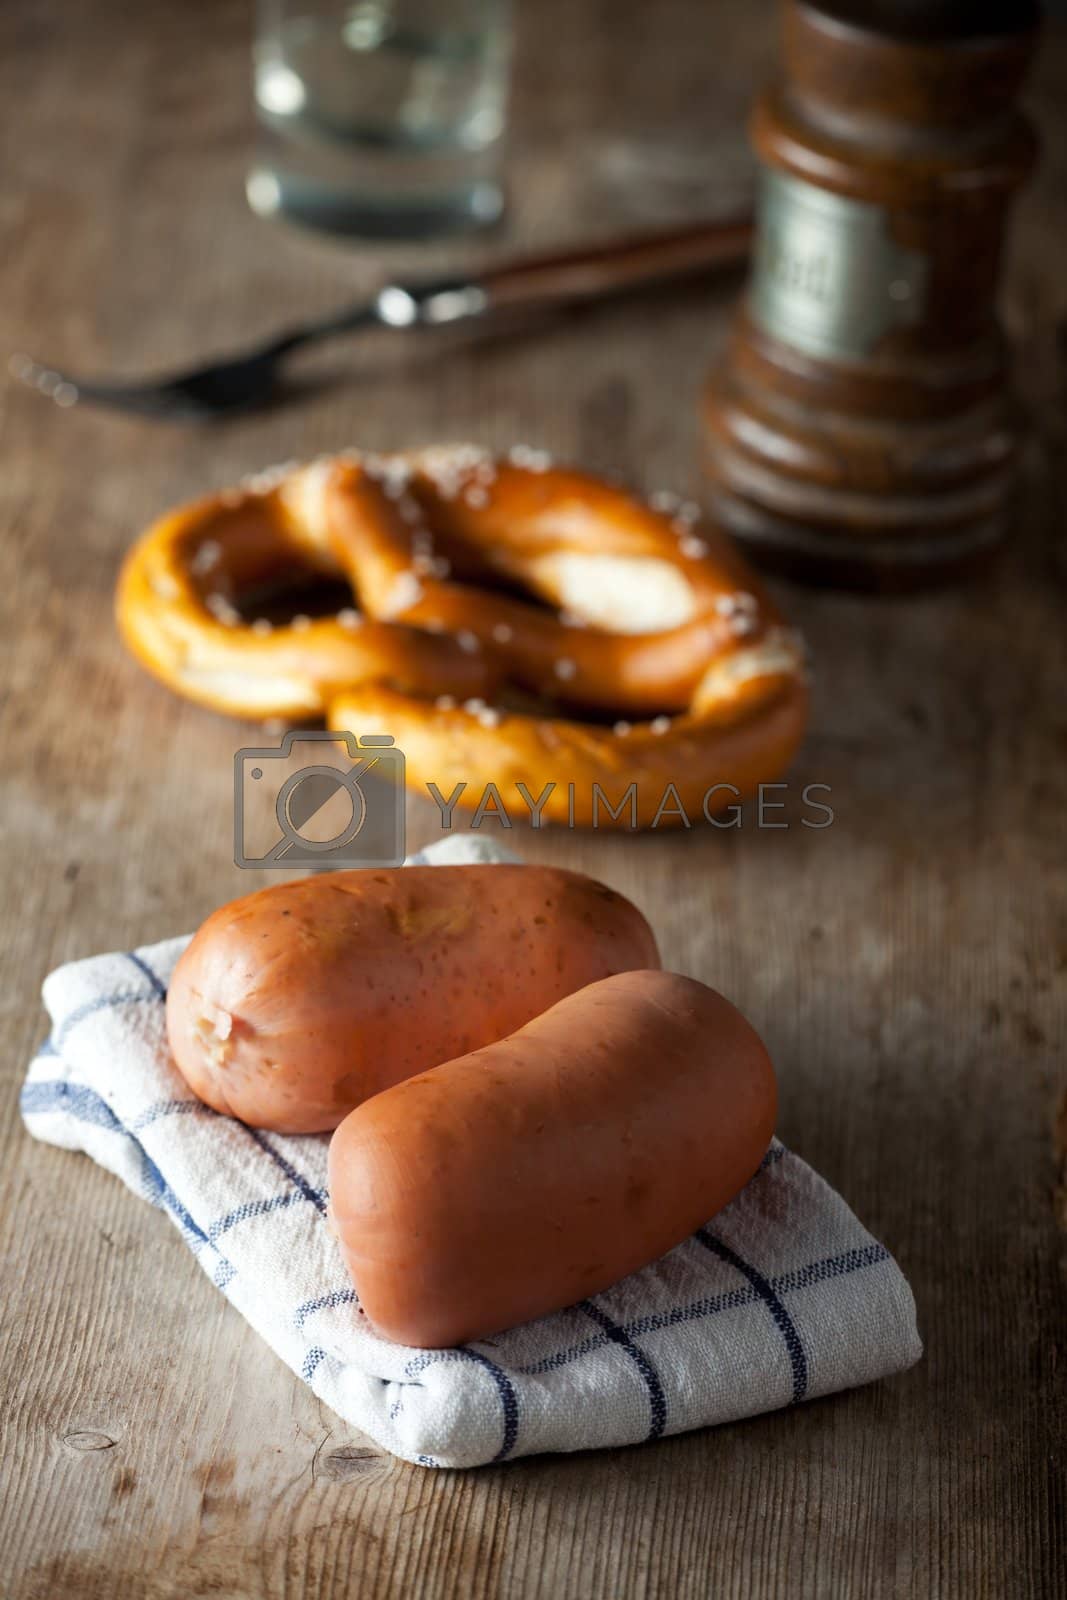 Royalty free image of two bavarian sausages by bernjuer